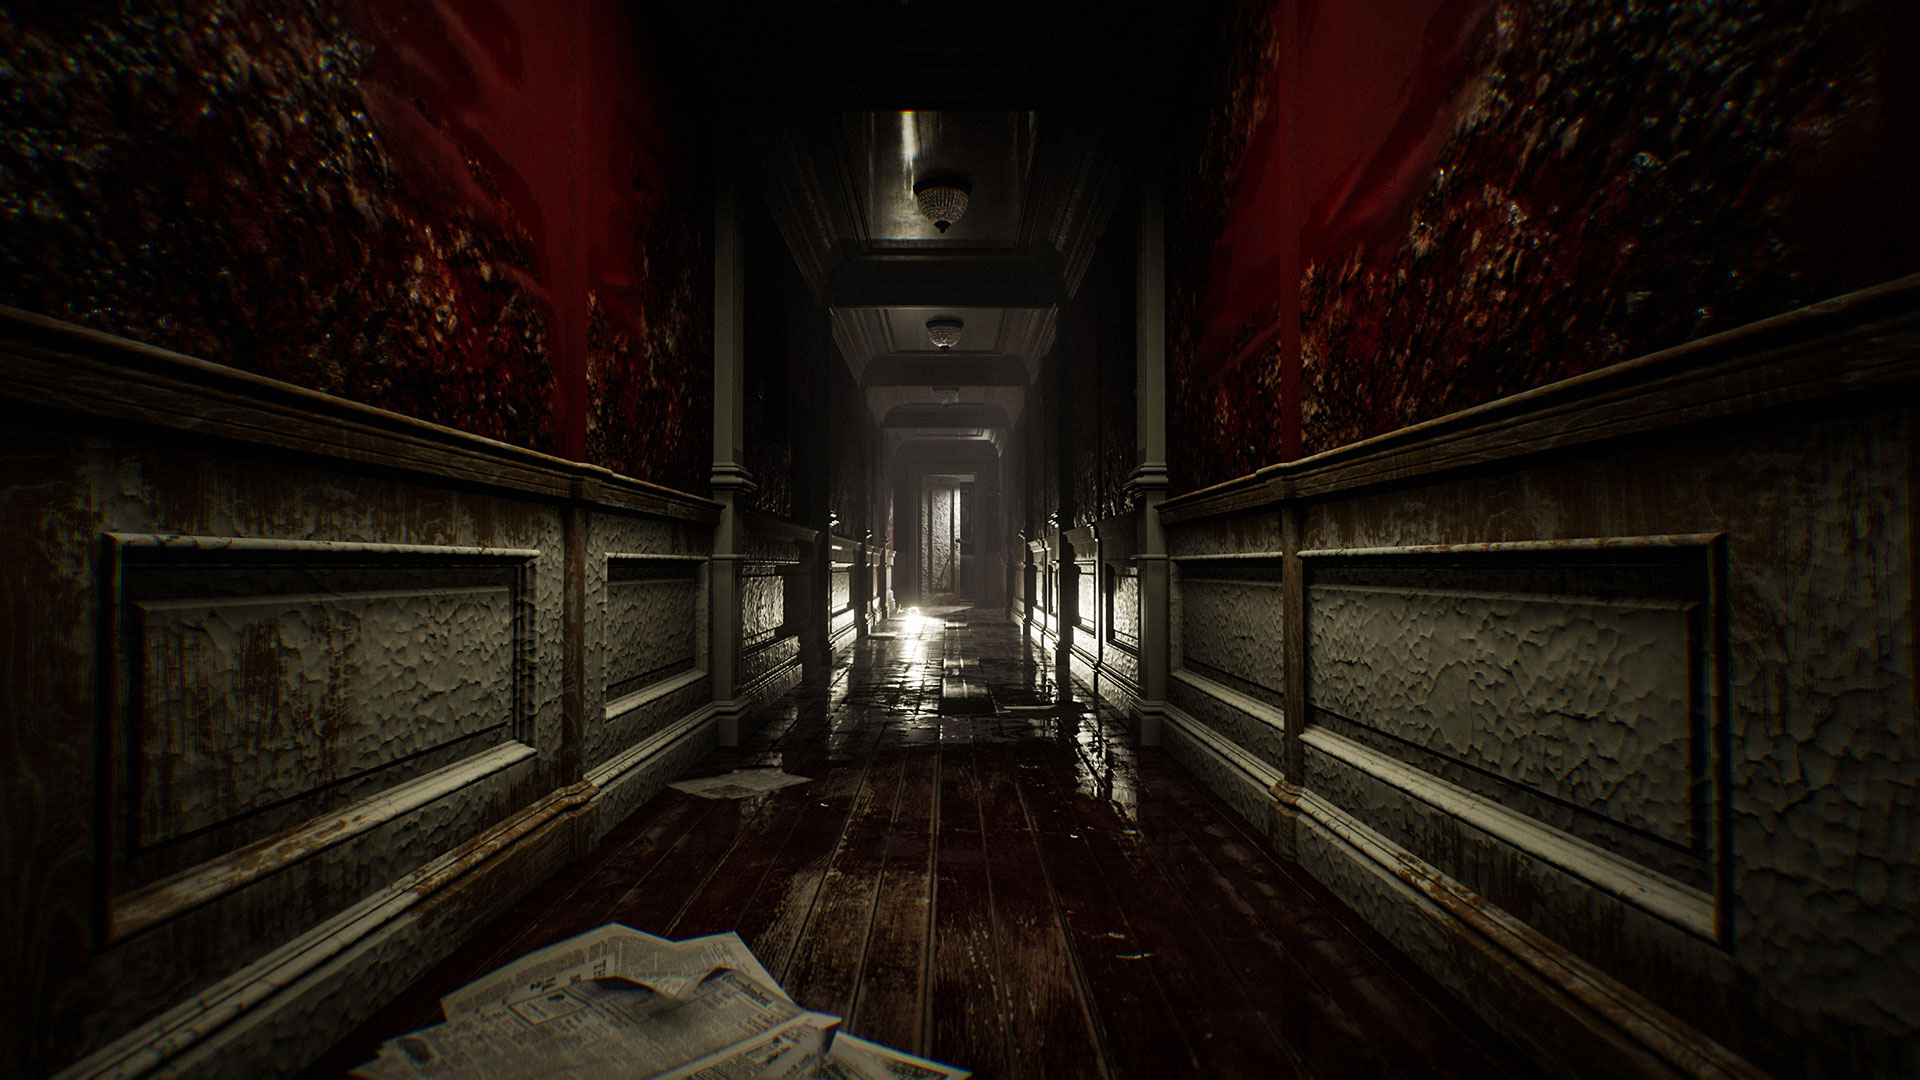 Layers of Fear: Masterpiece Edition - PS4